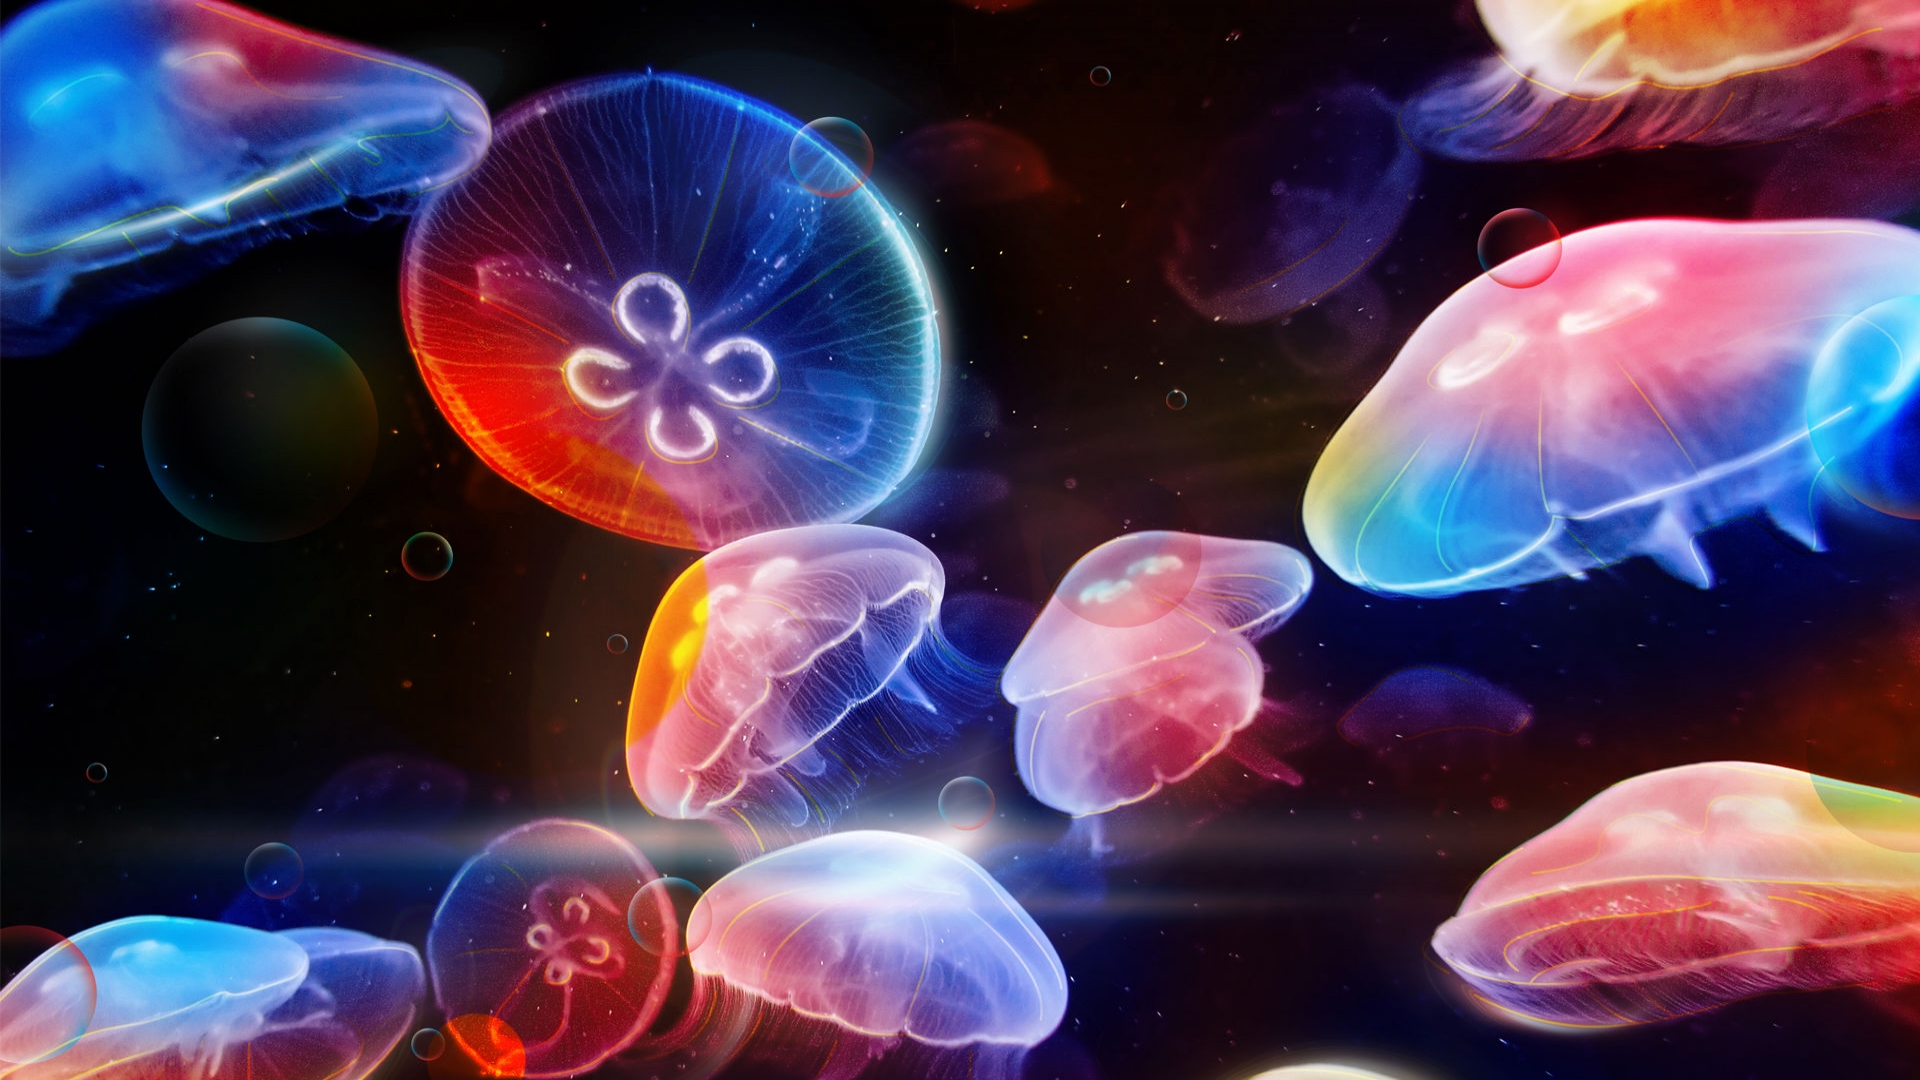 animals, Fishes, Jellyfish, Underwater, Bubbles, Color, Bright, Psychedelic, Ocean, Sea, Water, Manipulation, Cg, Digital, Art, Sealife, Life Wallpaper